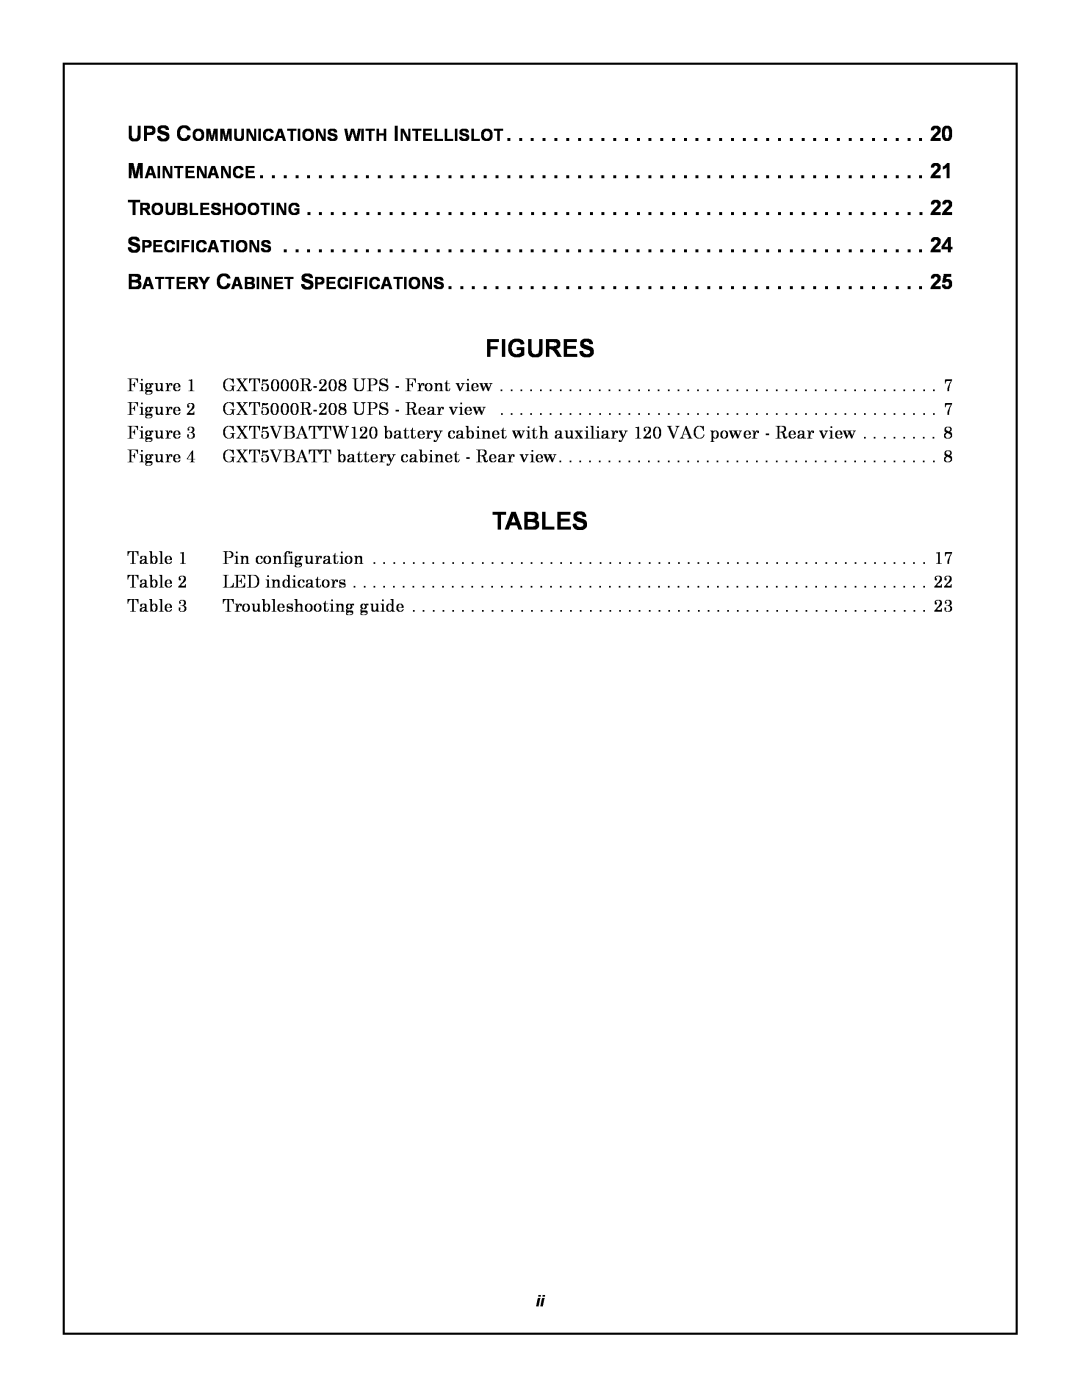 Emerson GXT5000R-208 user manual Figures, Tables 